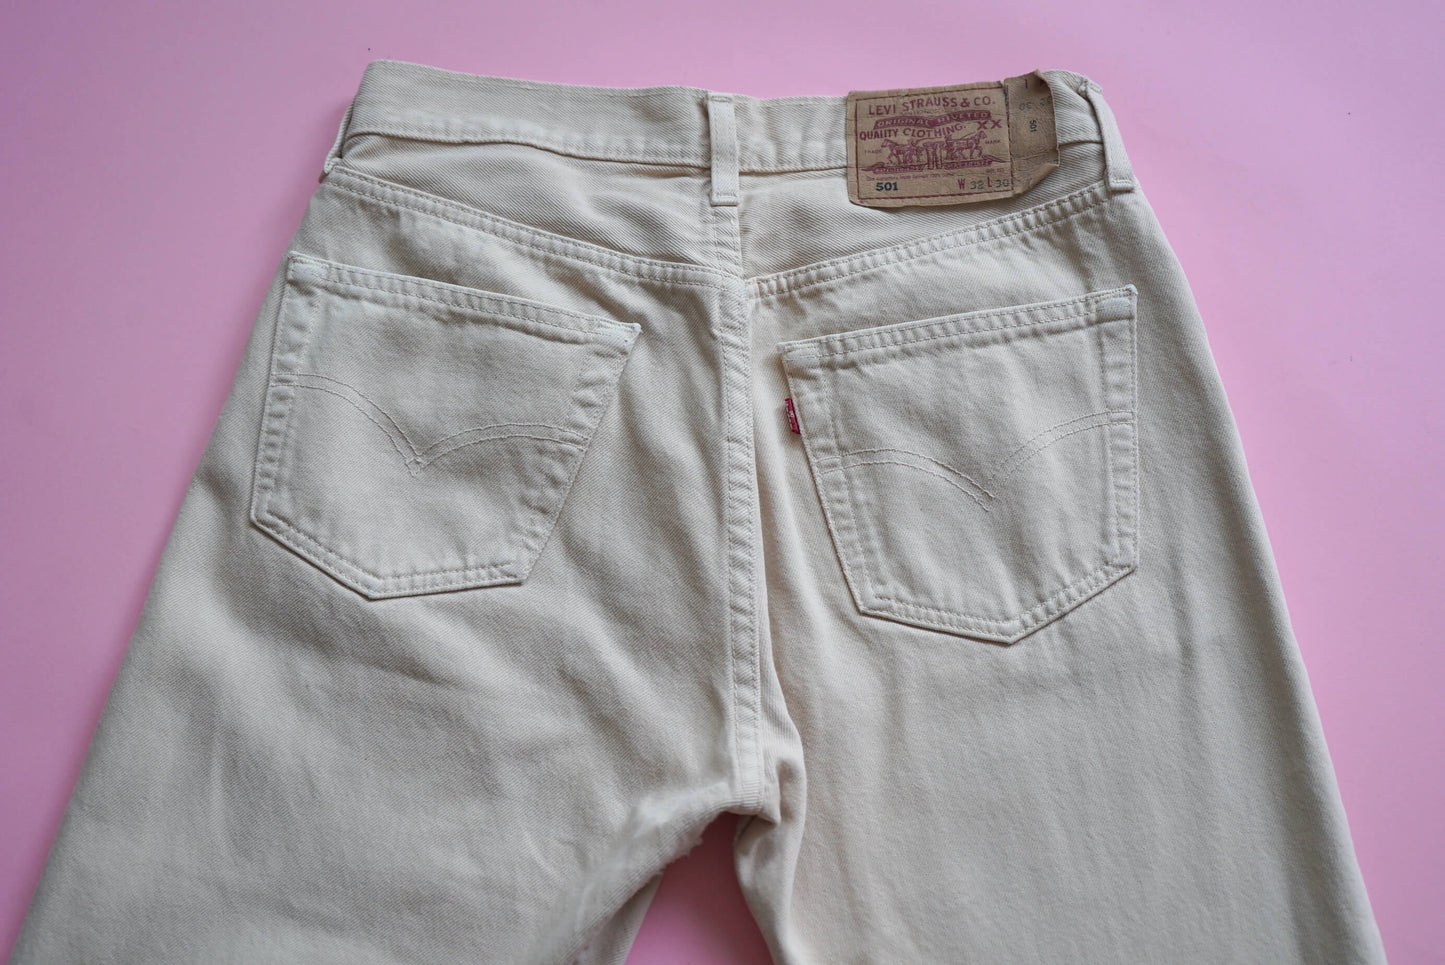 Levi's 501 Vintage Ivory Women's Jeans Made in UK, W27/L30